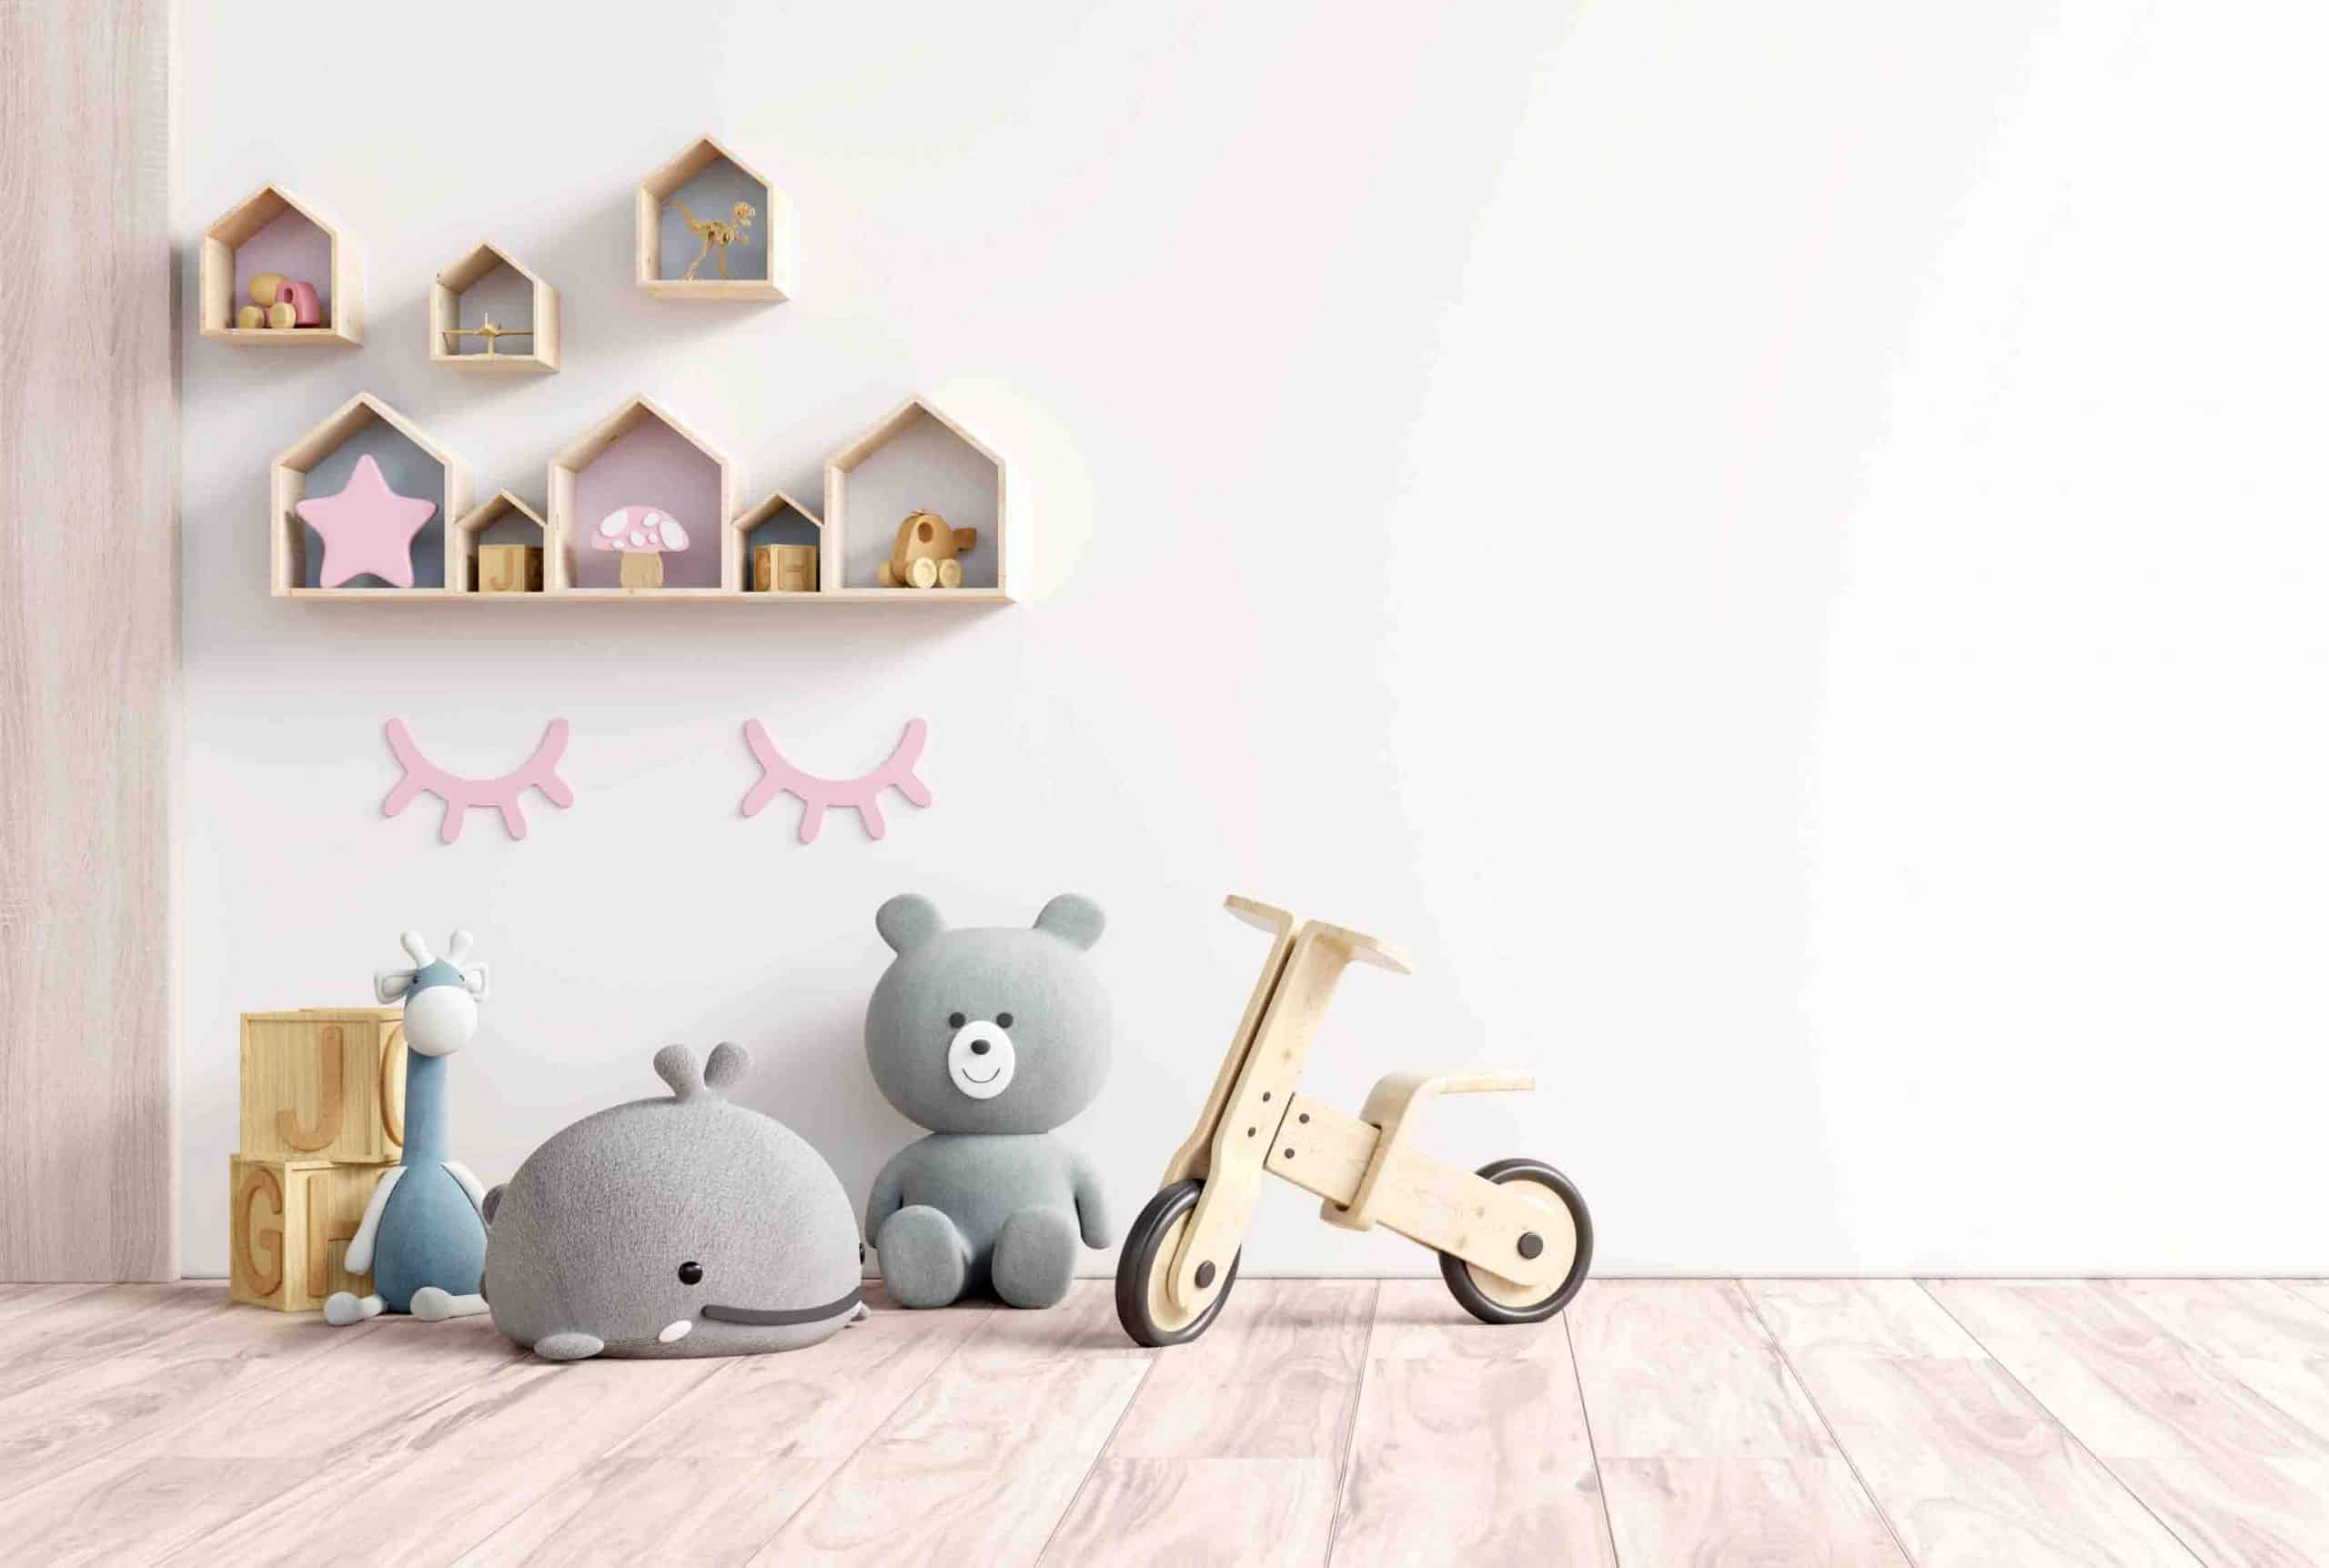 How To Design a Baby Nursery: Timeless Decorating Ideas